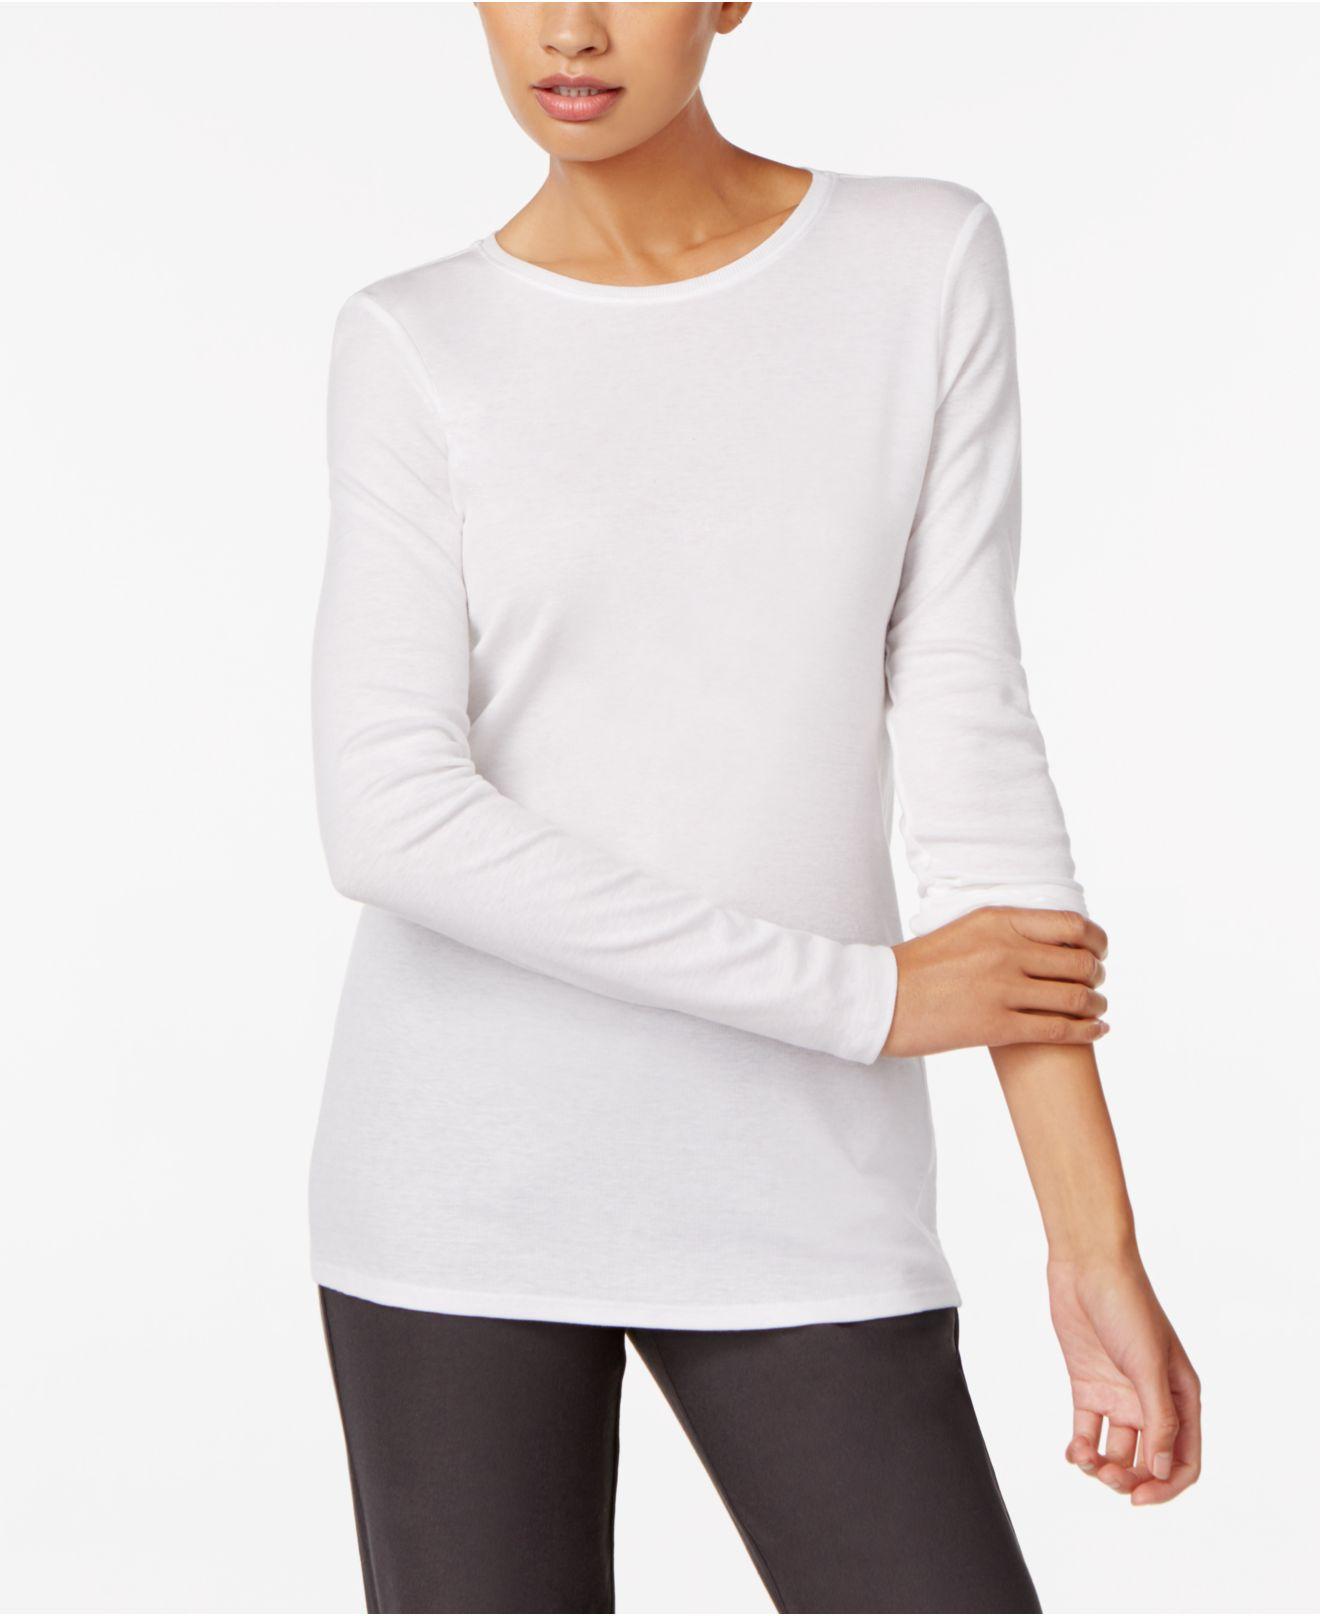 Eileen Fisher Synthetic Crew-neck Long-sleeve Top in White - Lyst